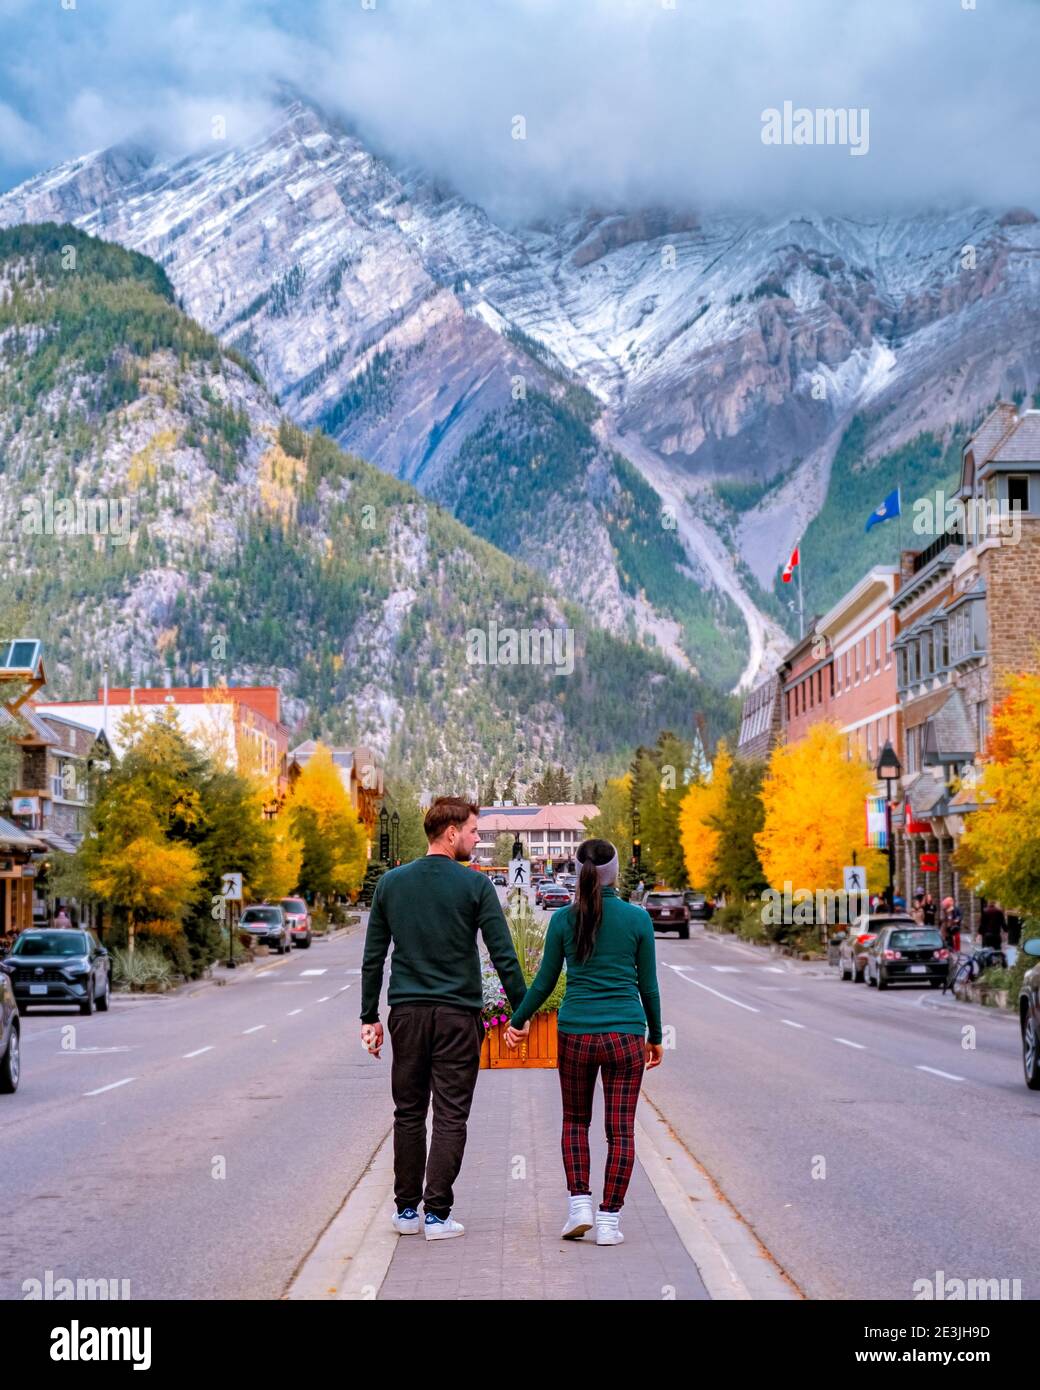 a couple visits the town of Banff Alberta Canada, couple of men, and woman walking at the street of Banff with huge rocky mountains at the background in Canada. Stock Photo